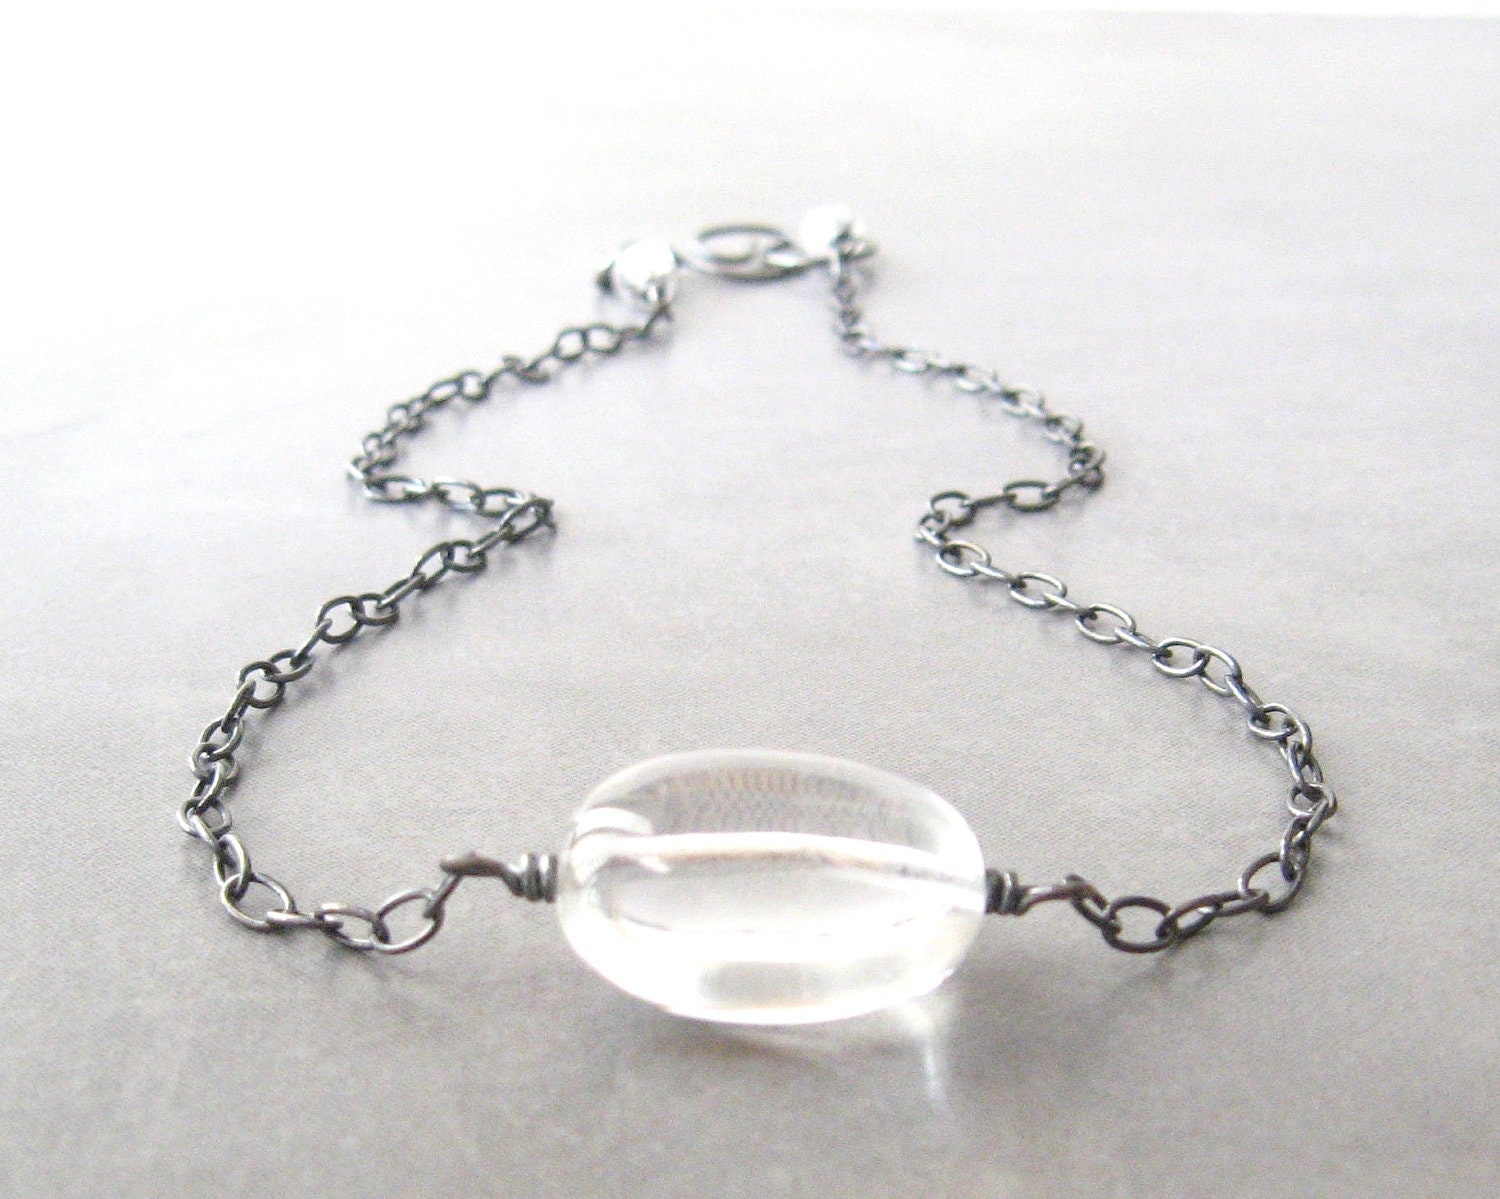 crystal quartz necklace, wire wrapped choker, rustic quartz necklace, sterling chain - theBeadAerie